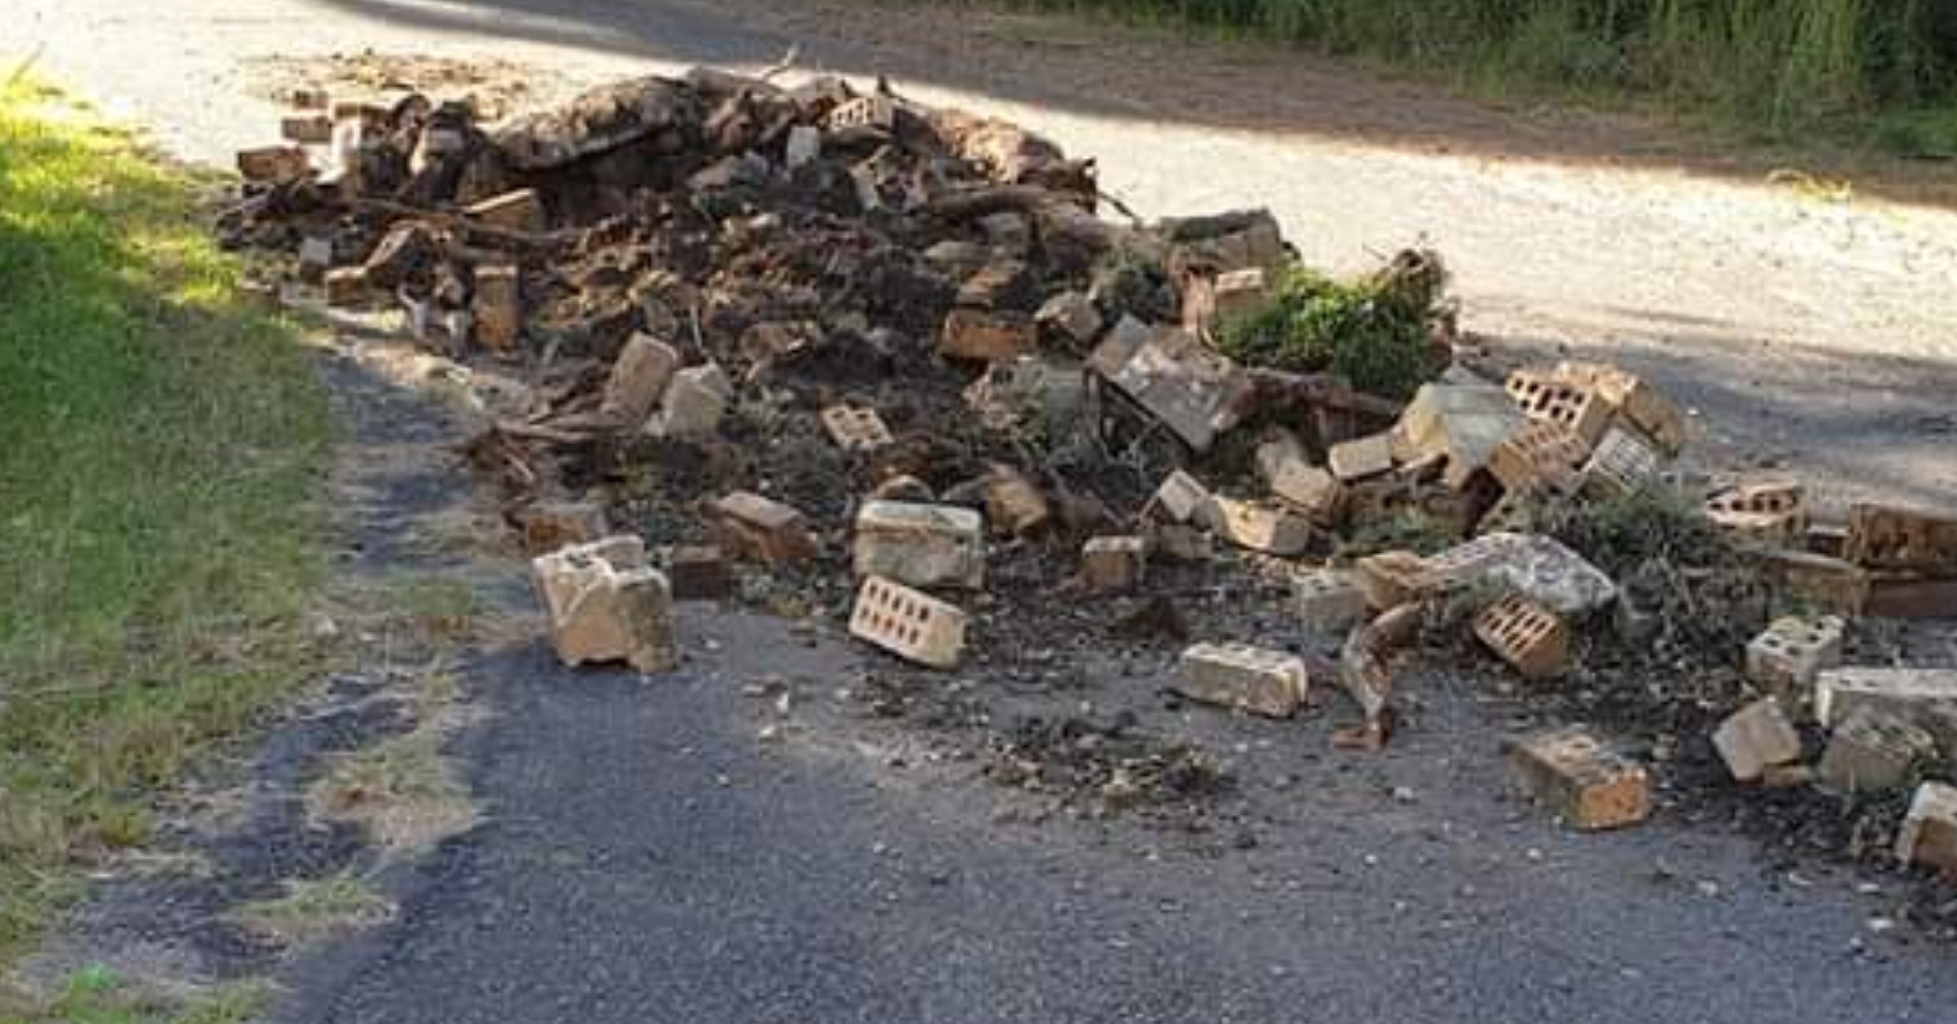 You are currently viewing FIRE STATION ACCESS BLOCKED BY ILLEGAL DUMPING